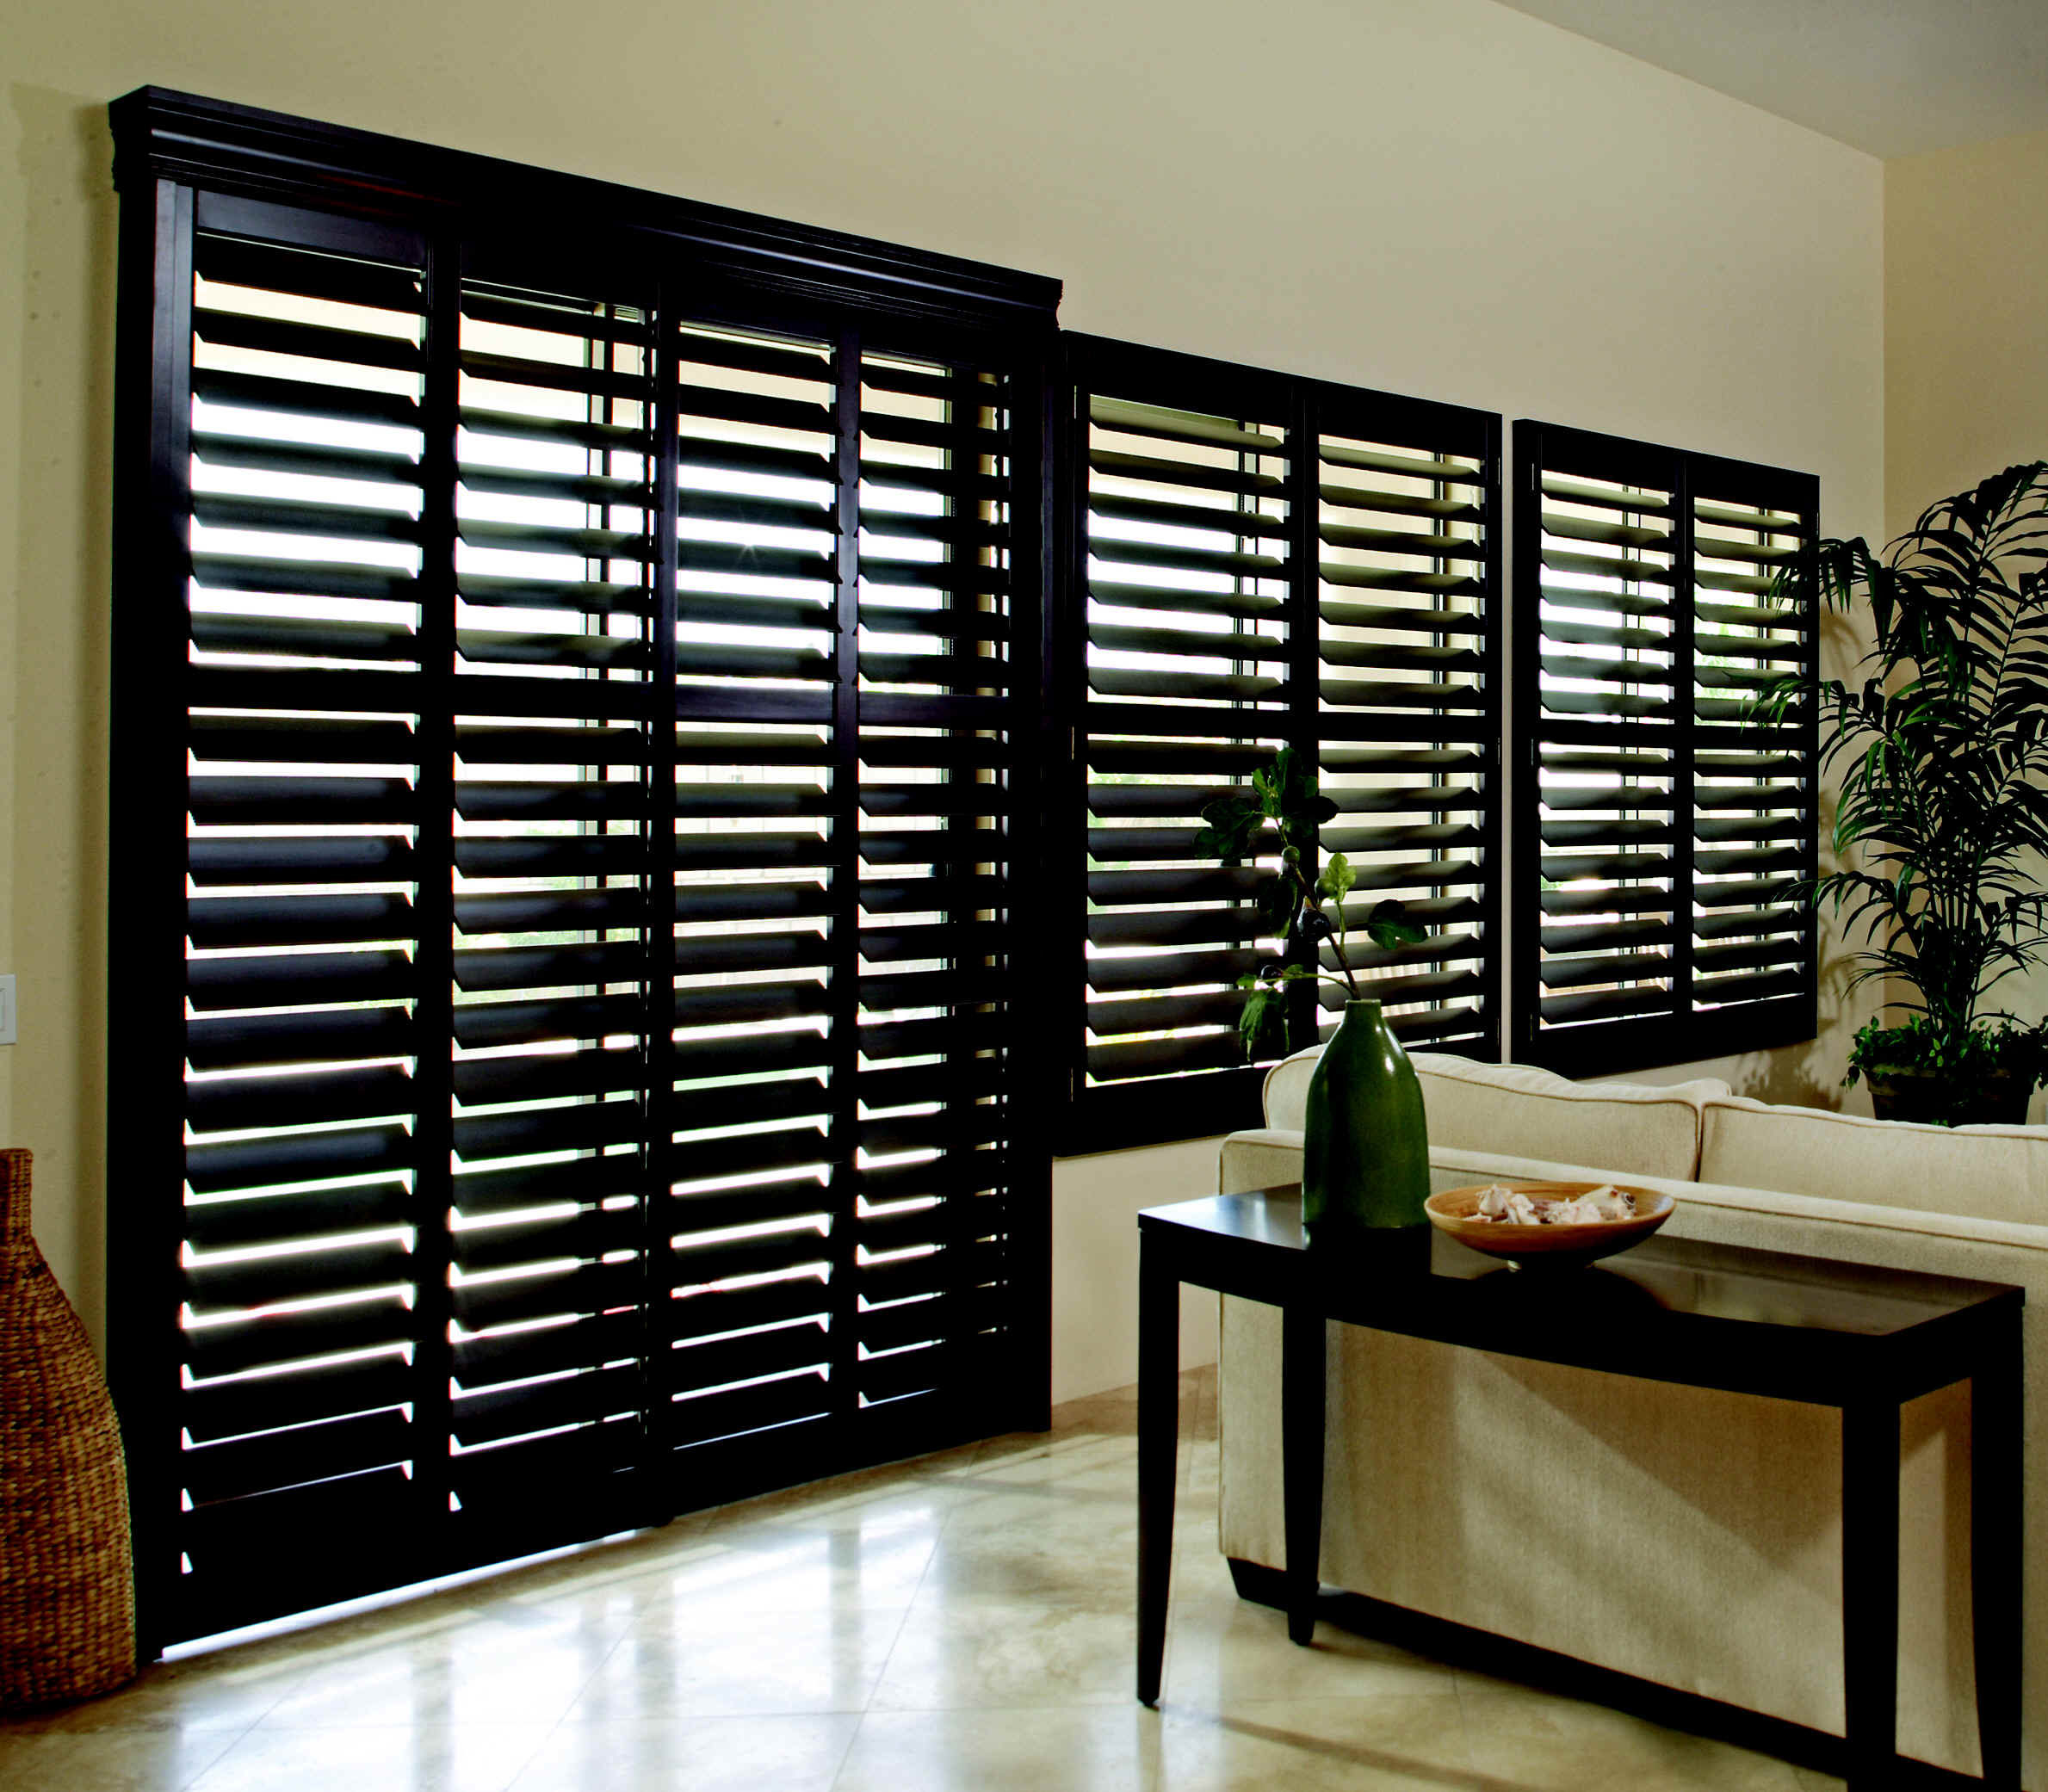 Clearview Shutters For Sale At Low Prices in Stanton